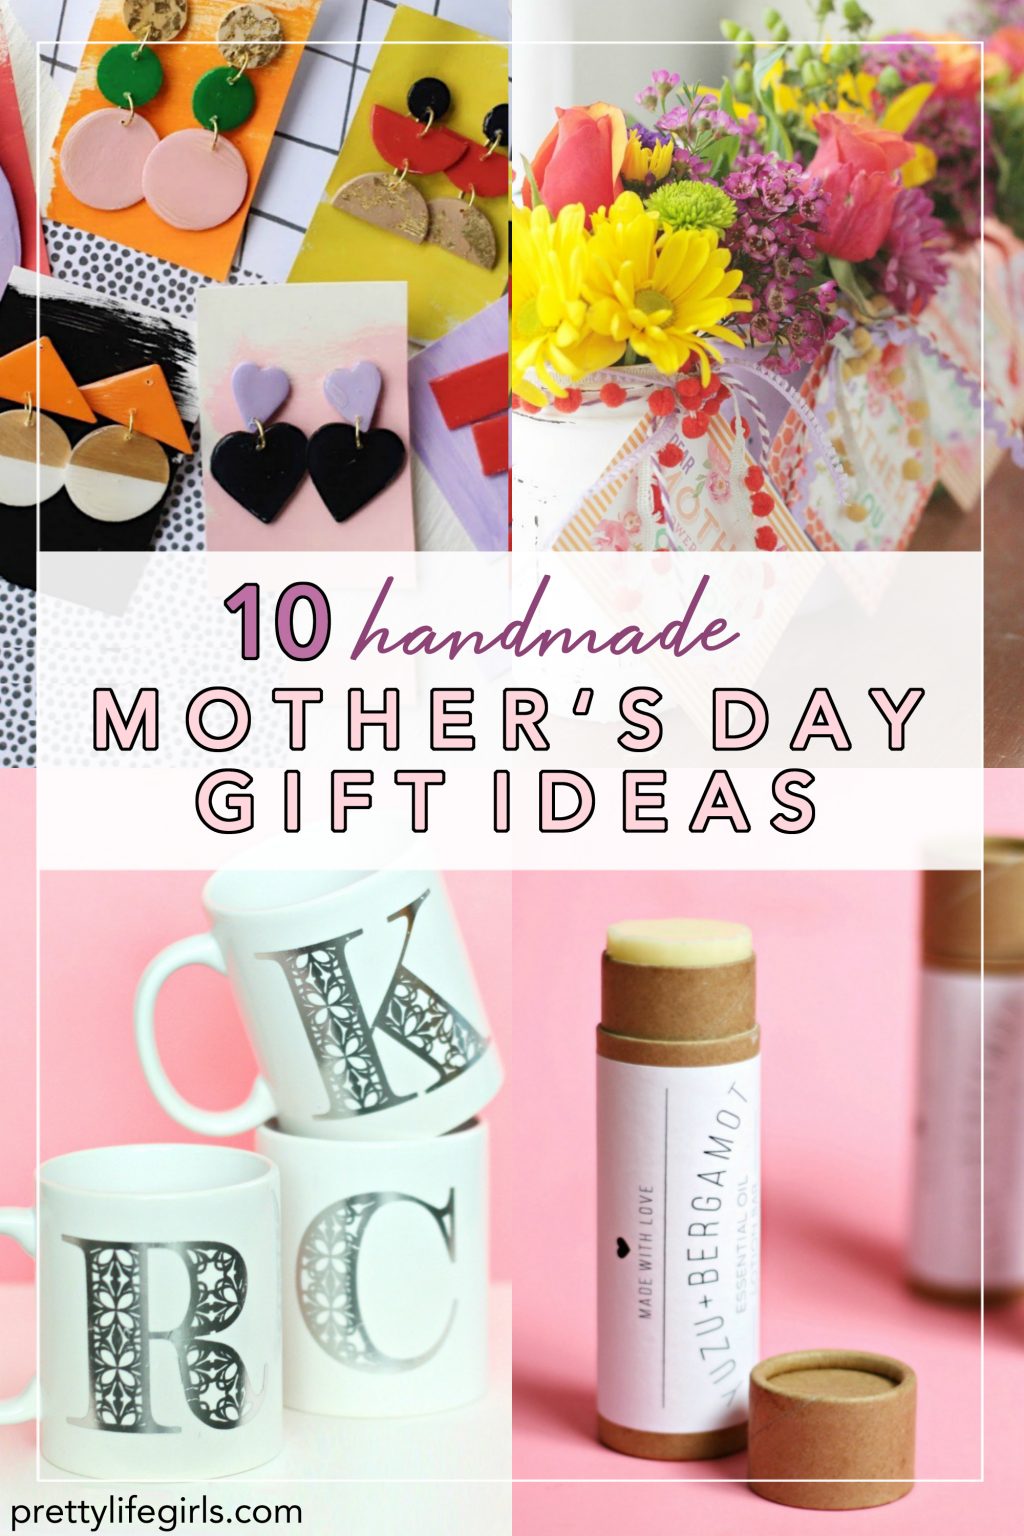 Ten Handmade Mother's Day Gift Ideas | The Pretty Life Girls